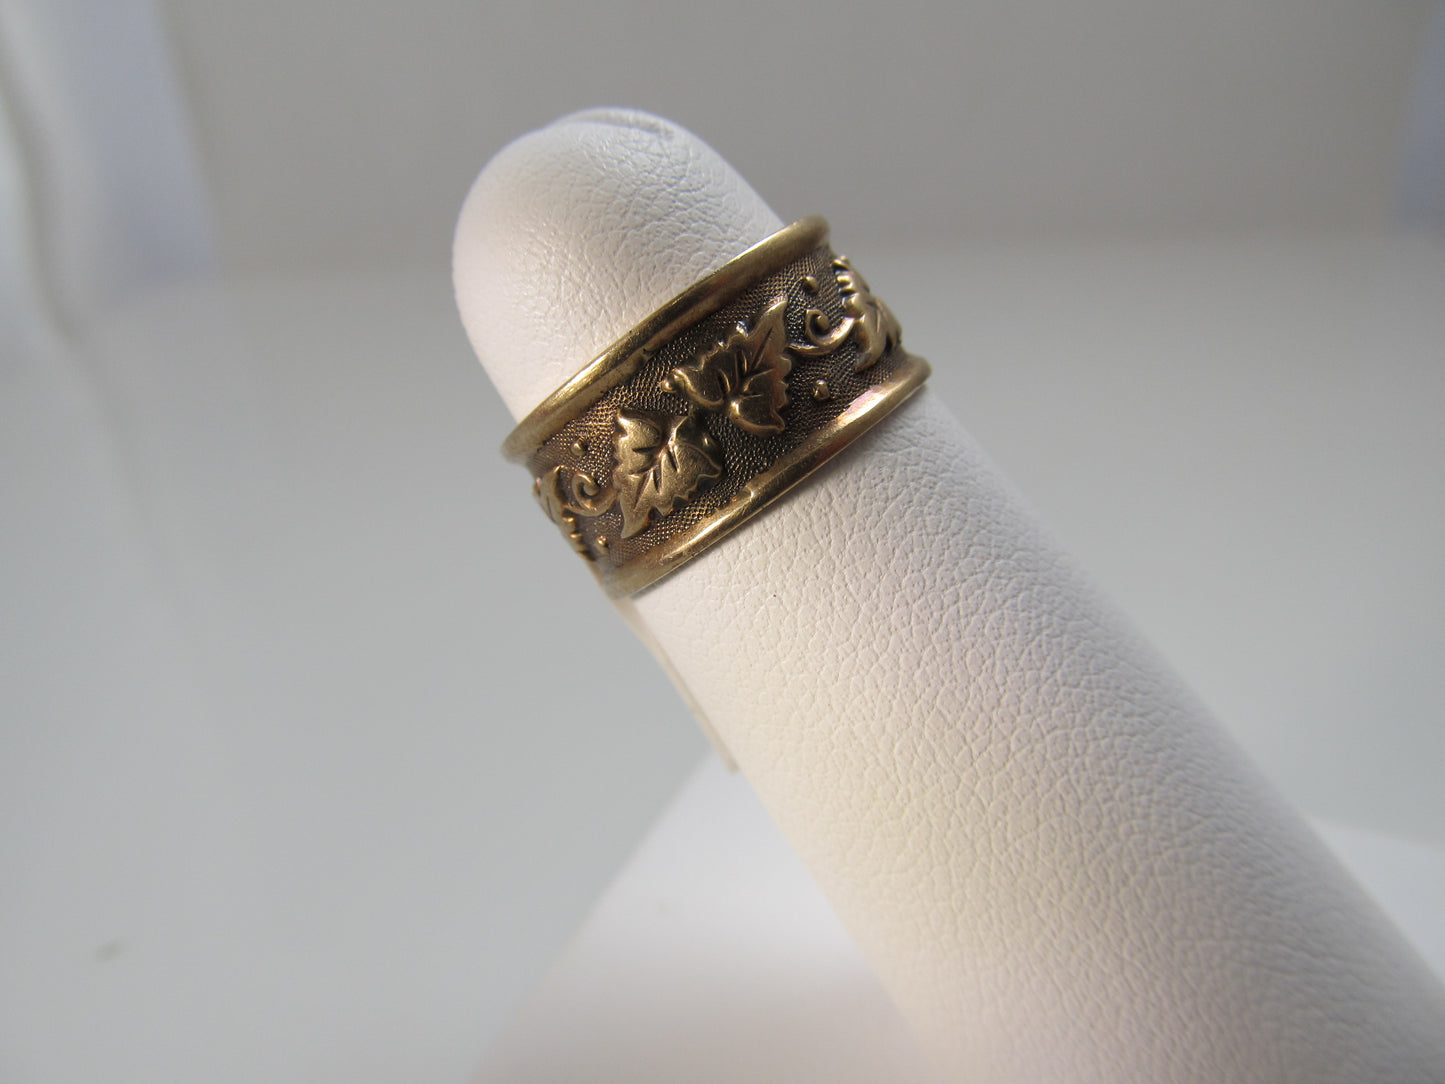 14k gold wedding band, dated 1901